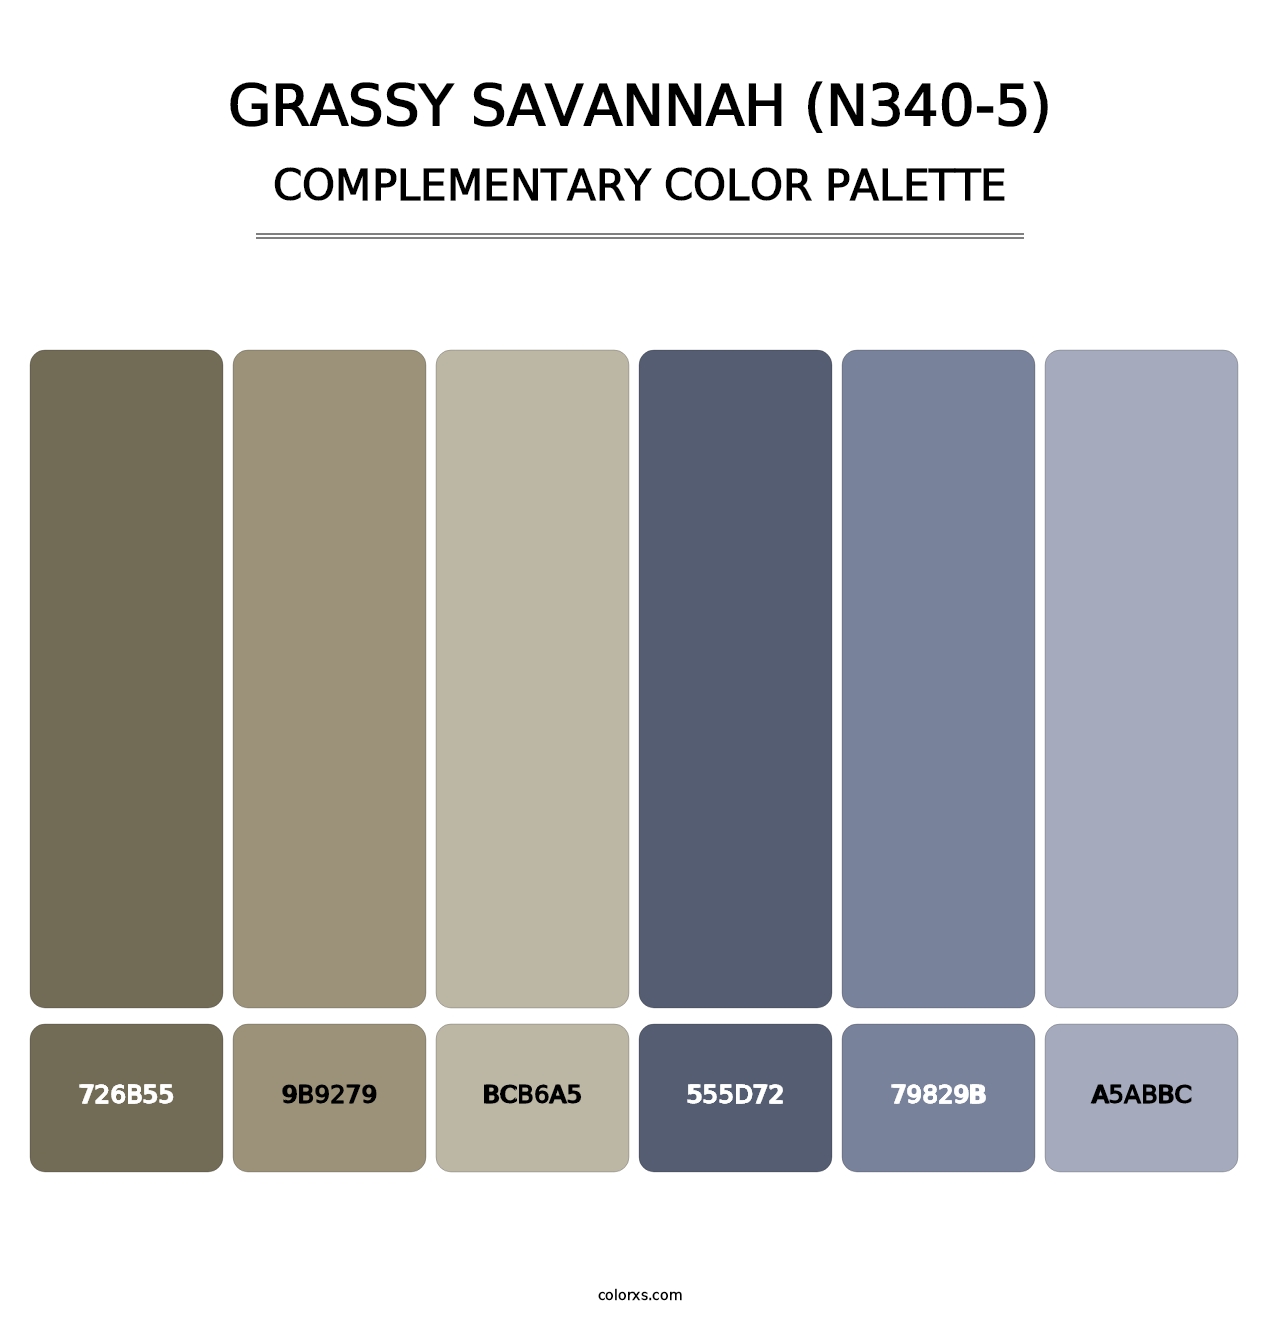 Grassy Savannah (N340-5) - Complementary Color Palette